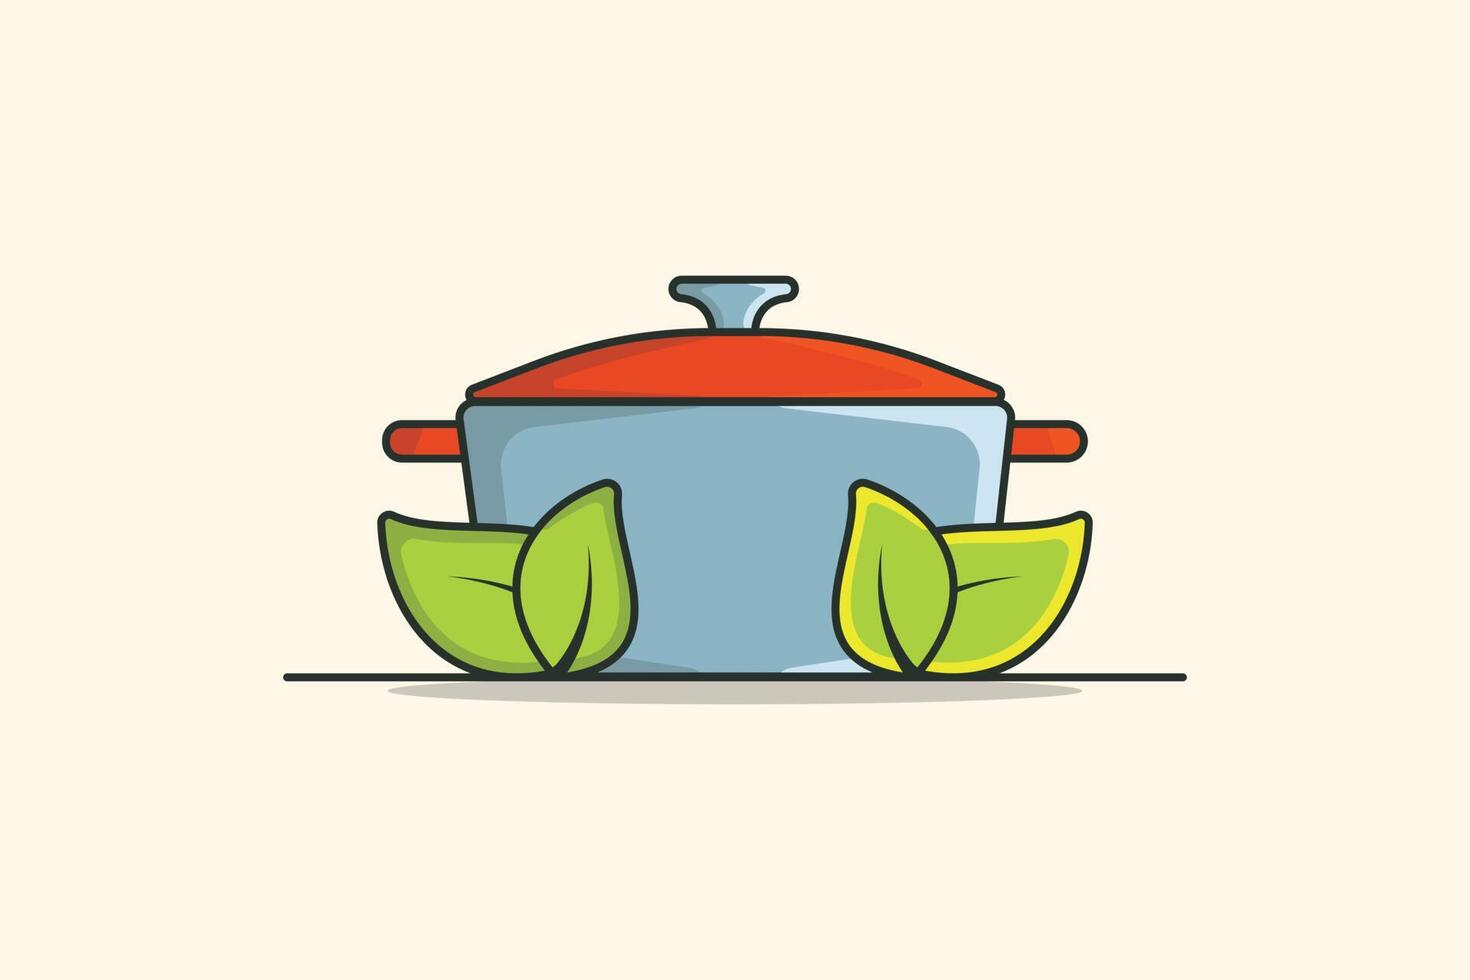 Casserole Dish Kitchen Cooking Pot with Green Leaves vector illustration. Kitchen appliance element icon concept. Pan with lid for dishes, kitchen, home cooking and leaves vector design with shadow.